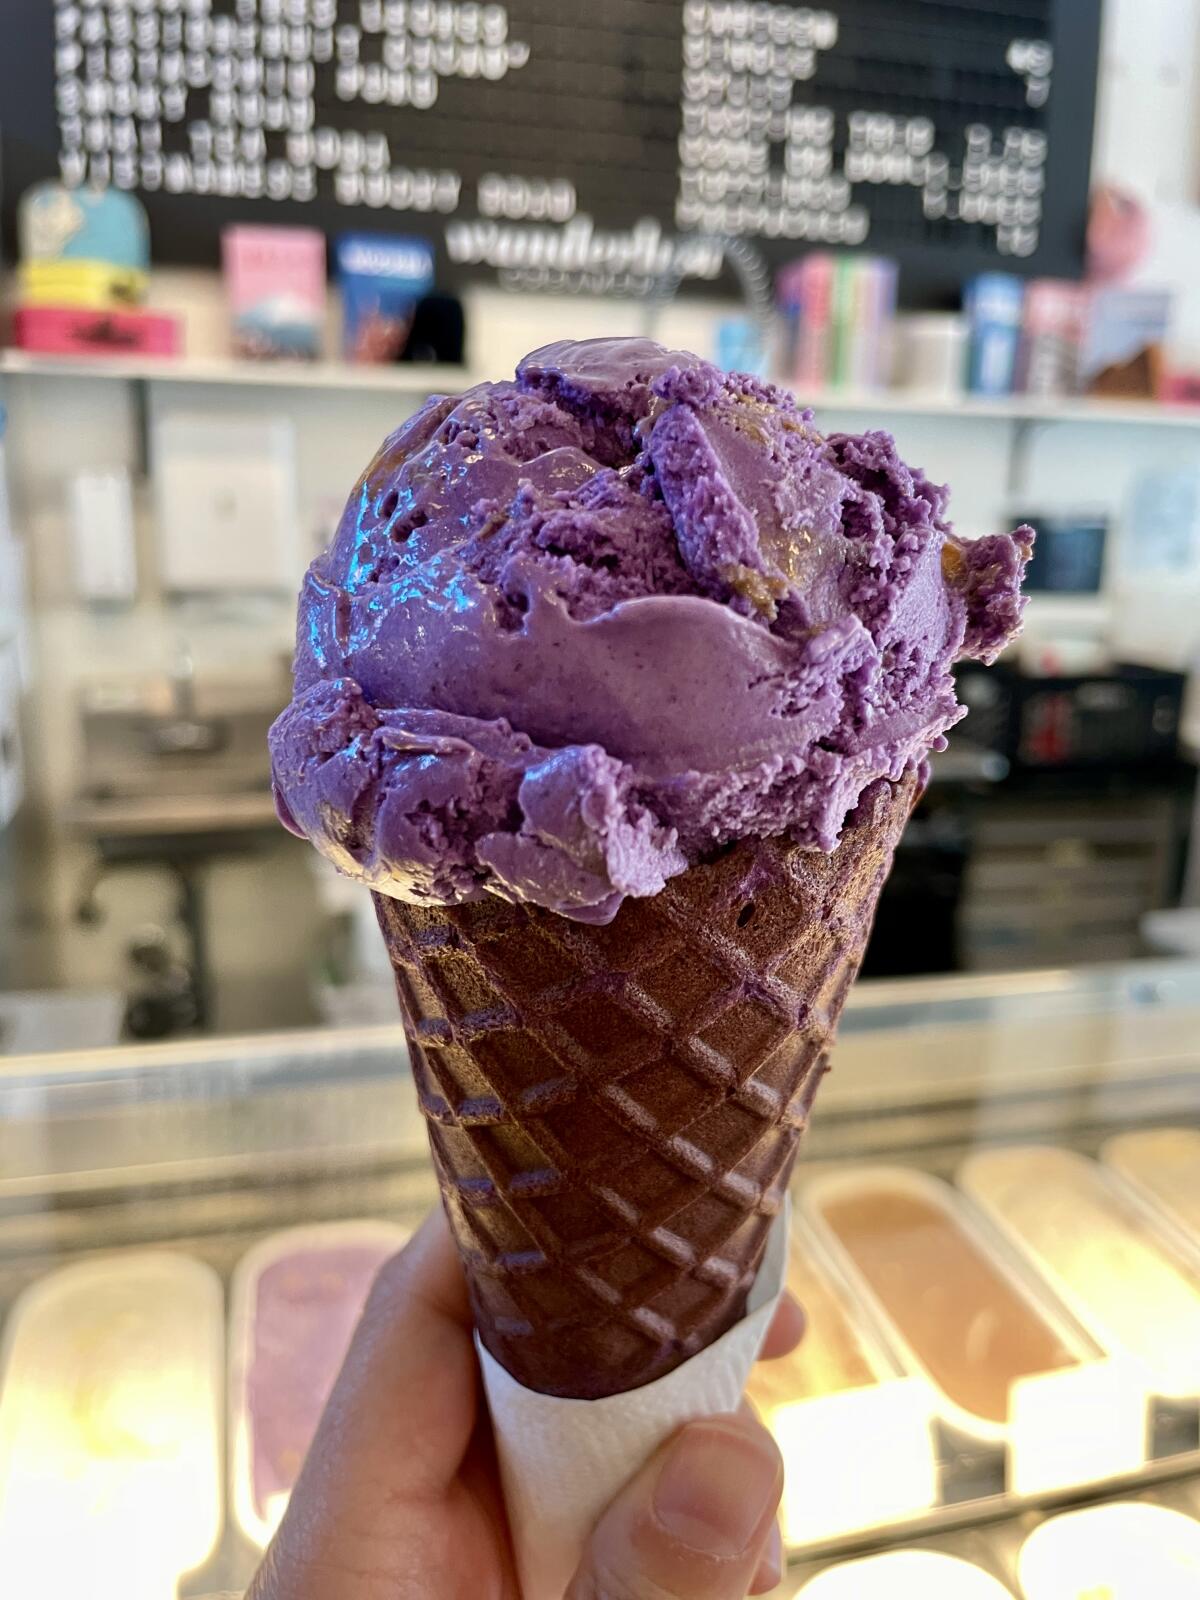 A hand holds a scoop of purple ice cream in a purple-tinted cone.